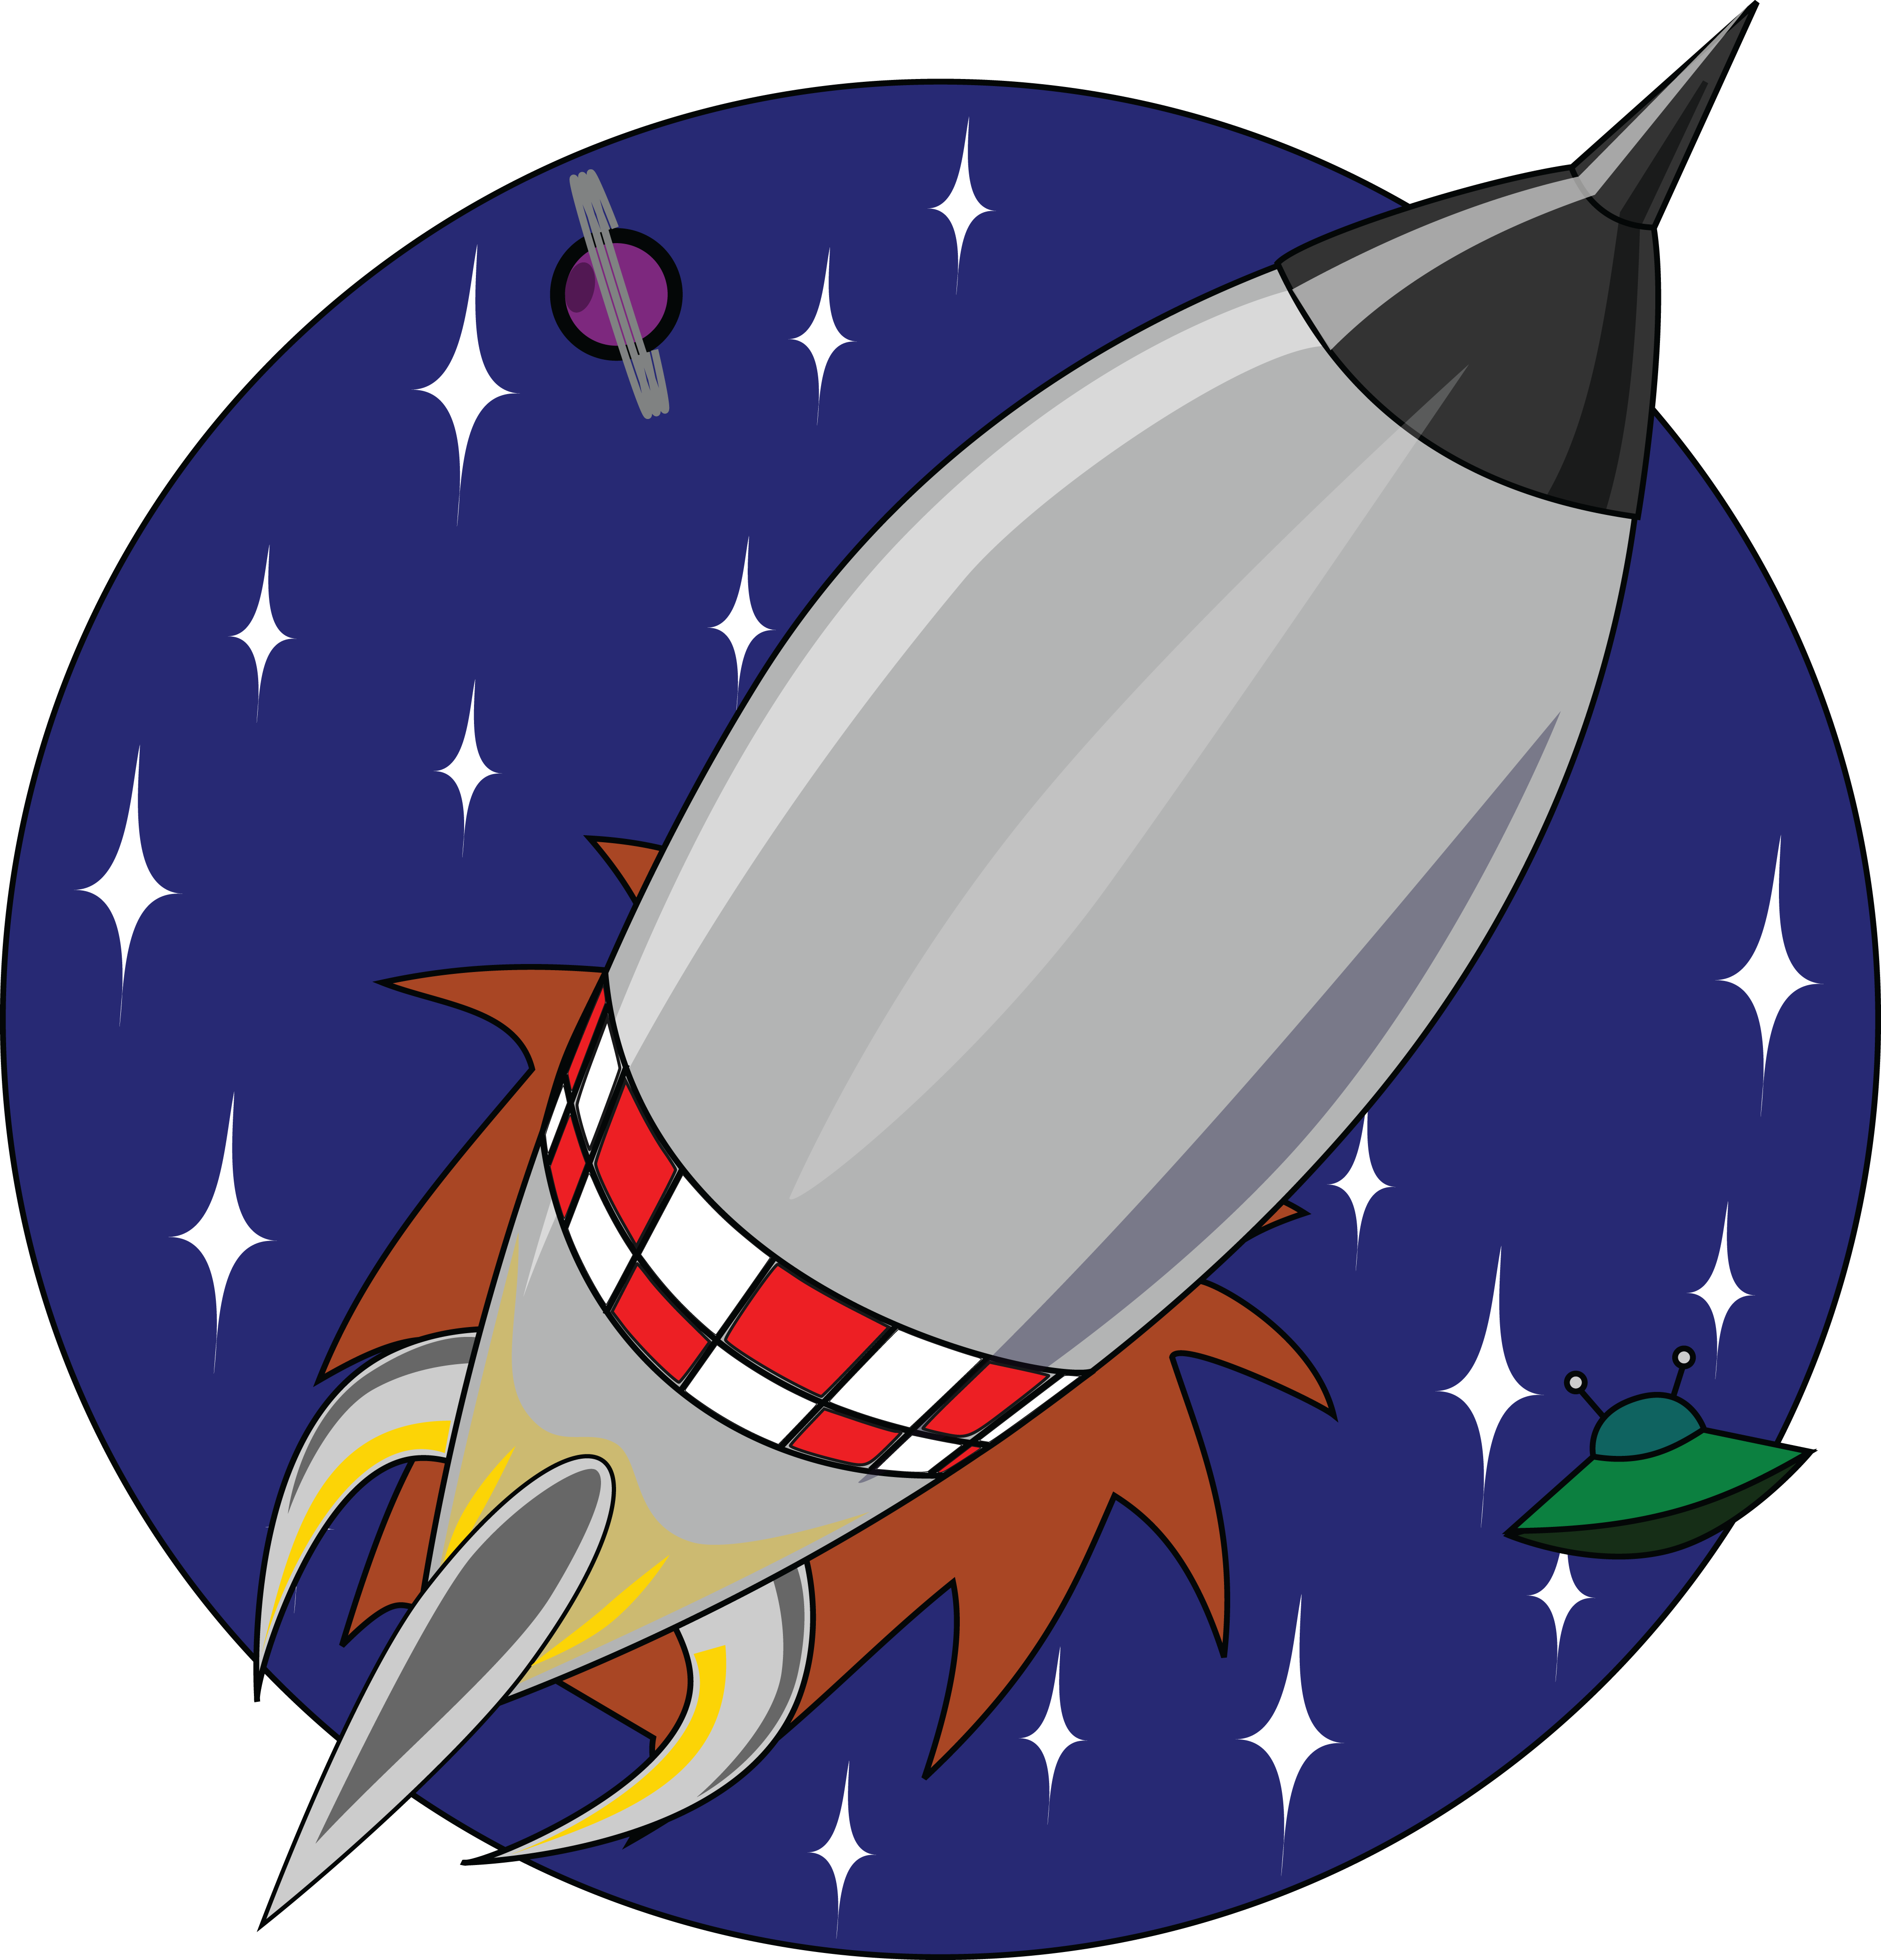 Free Clipart of a Shuttle Rocket in a Circle